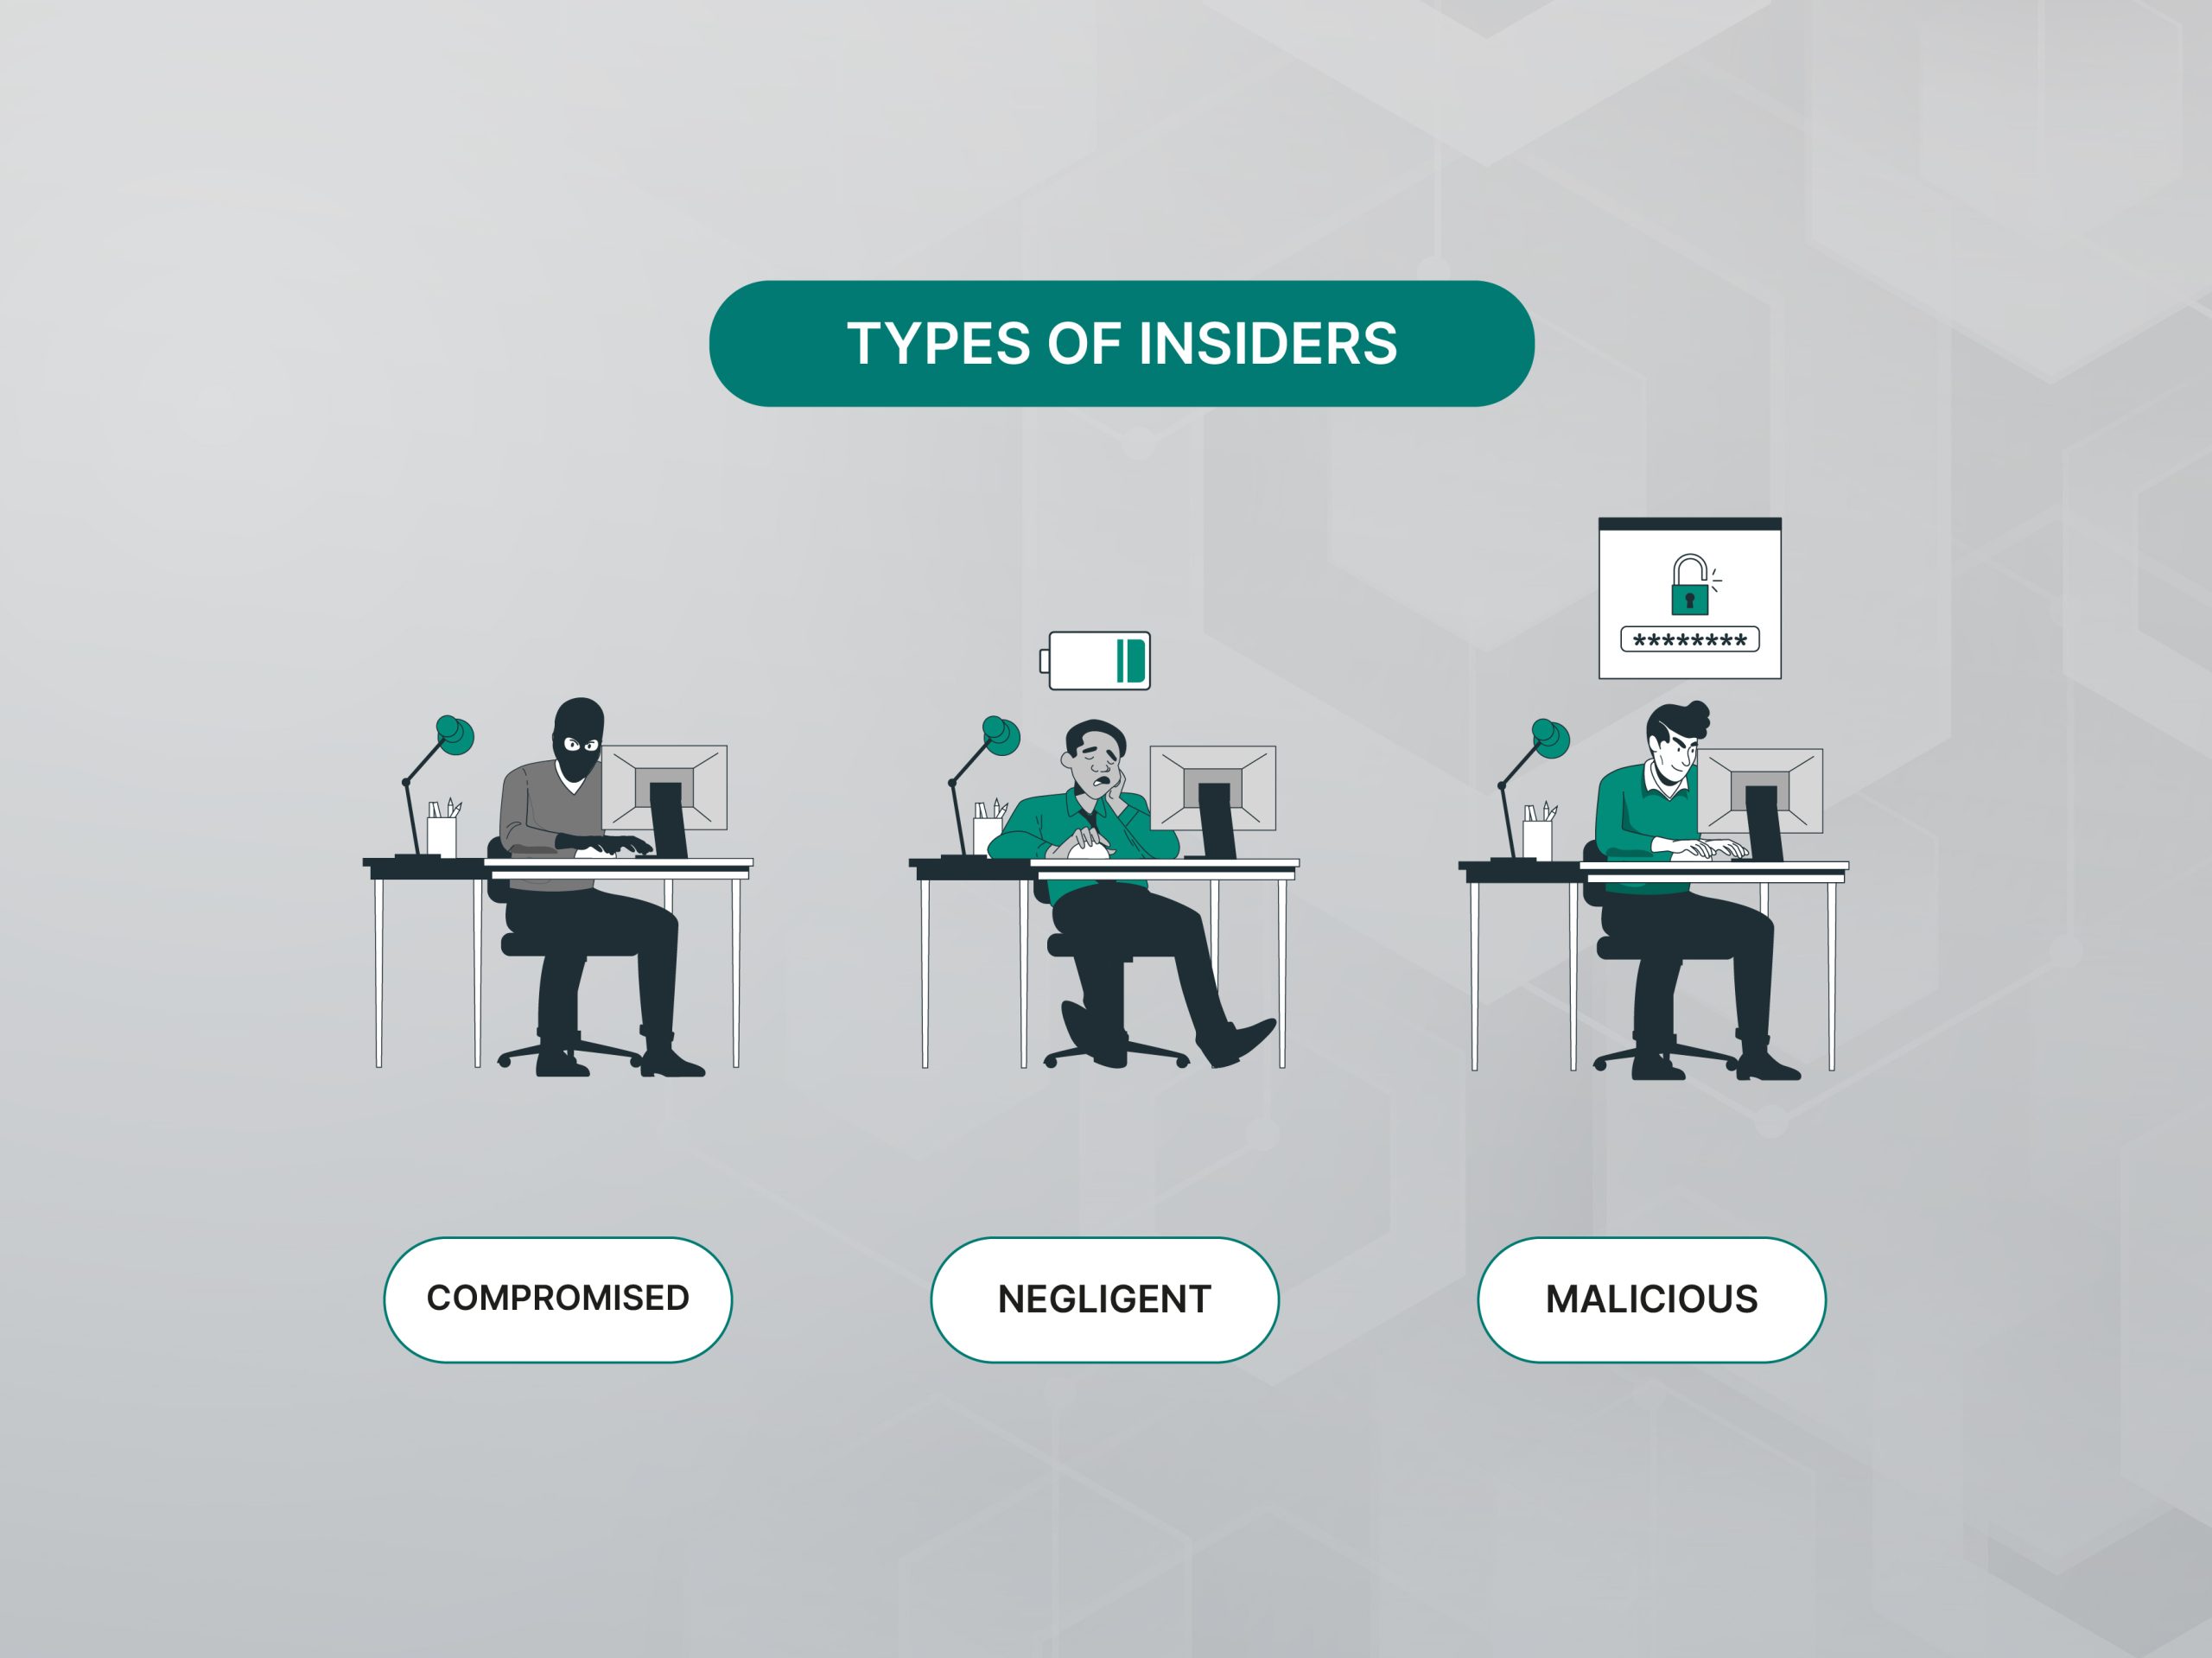 Insider types - Negligent, Malicious and Compromised